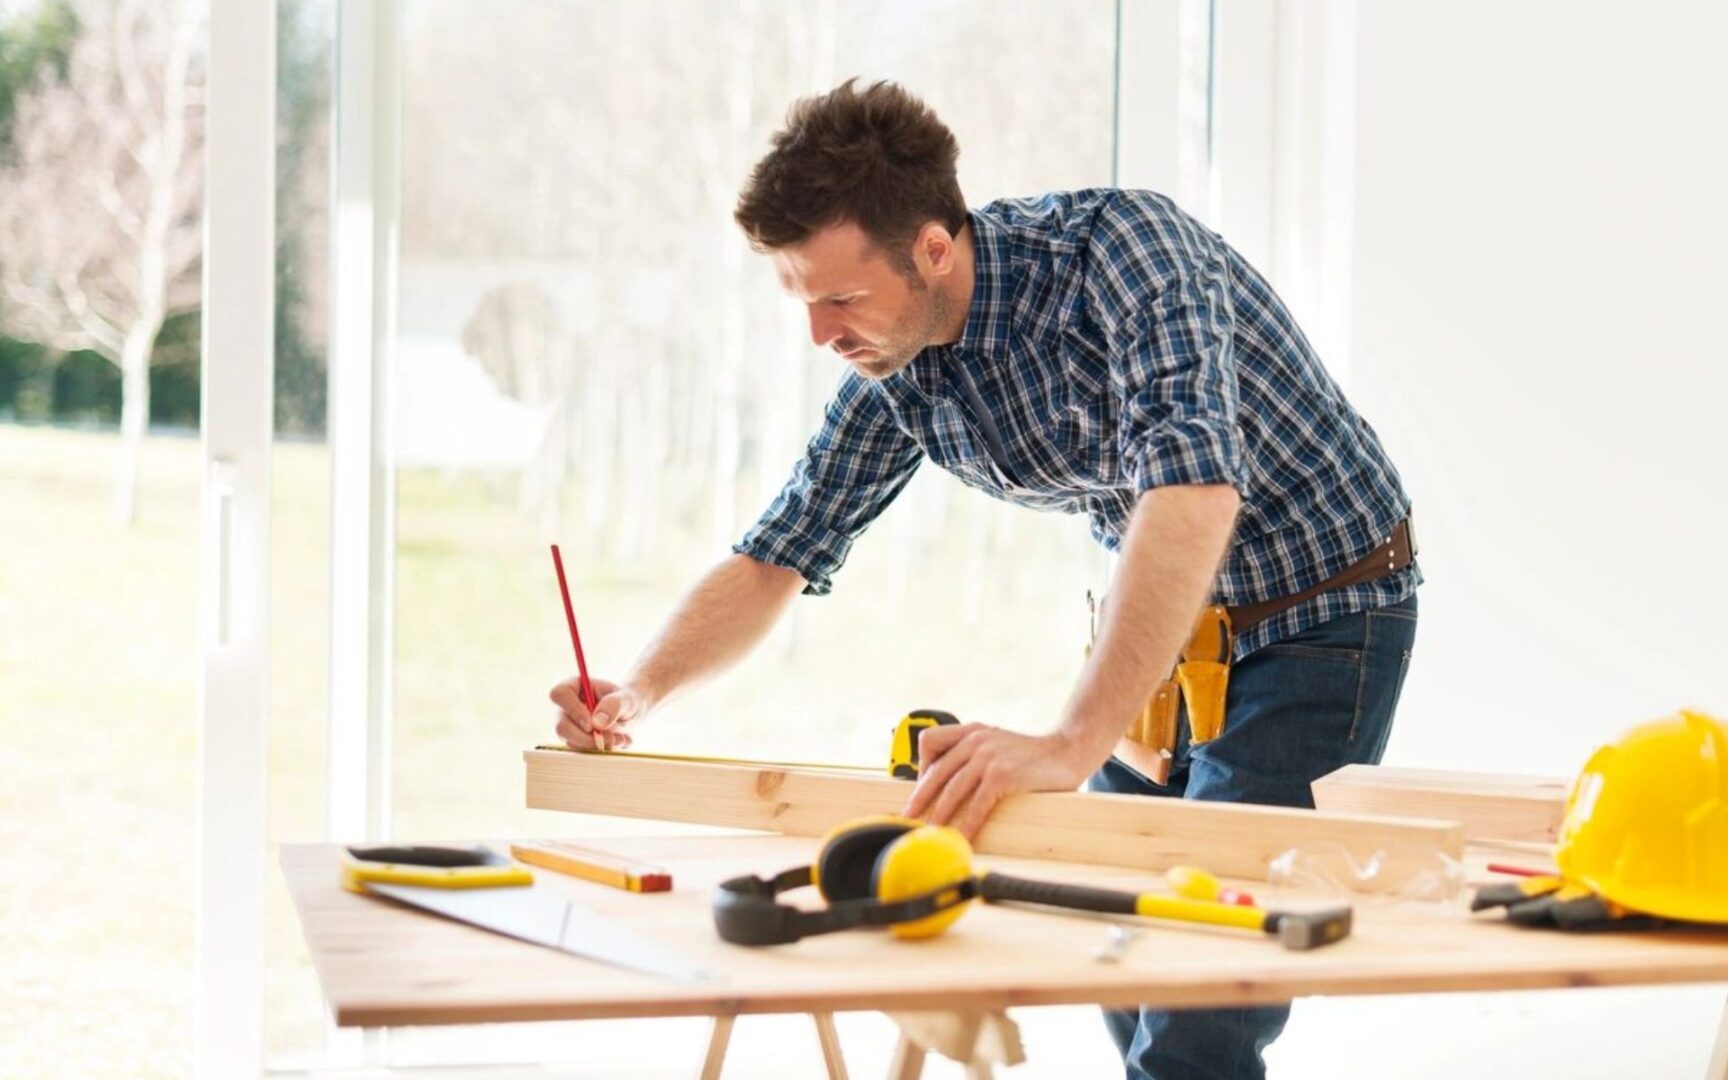 A man working on a table with tools in front of him.